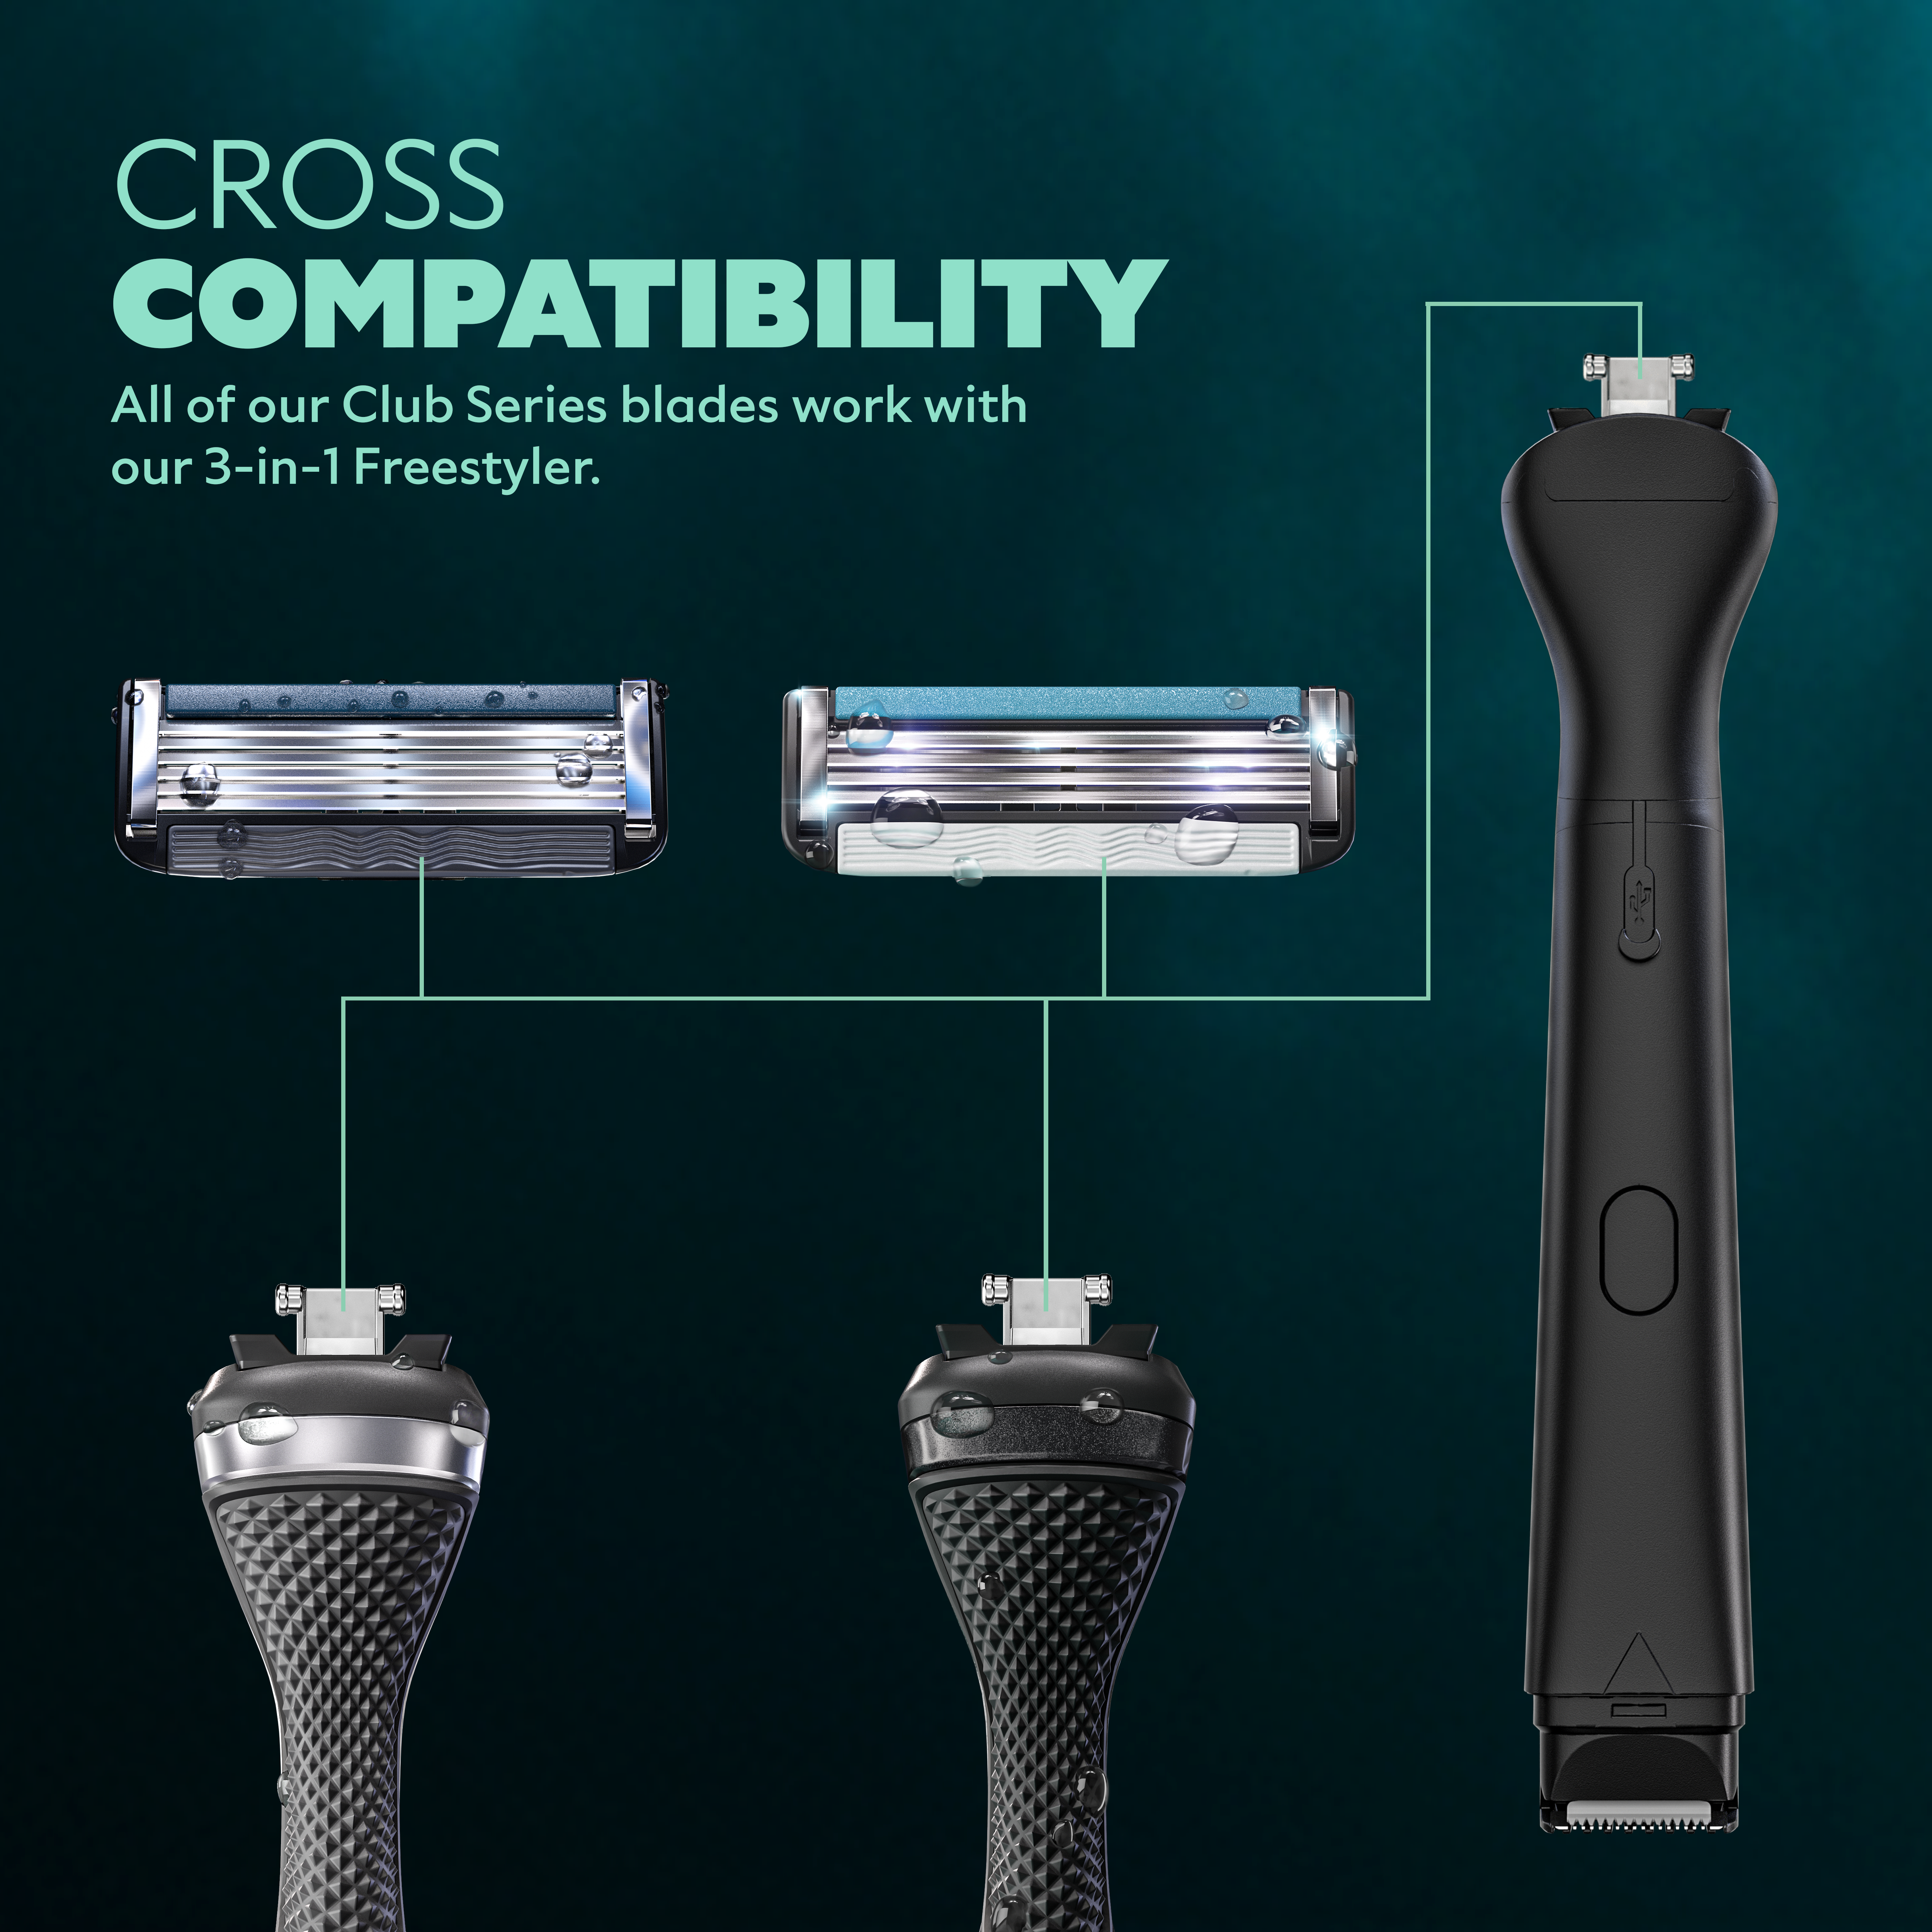 An infographic showing the cross-compatibility of the Club Series 4 and 6 Blade razor with the Club Series Diamond Grip Handle and the the 3-in-1 Freestyler.